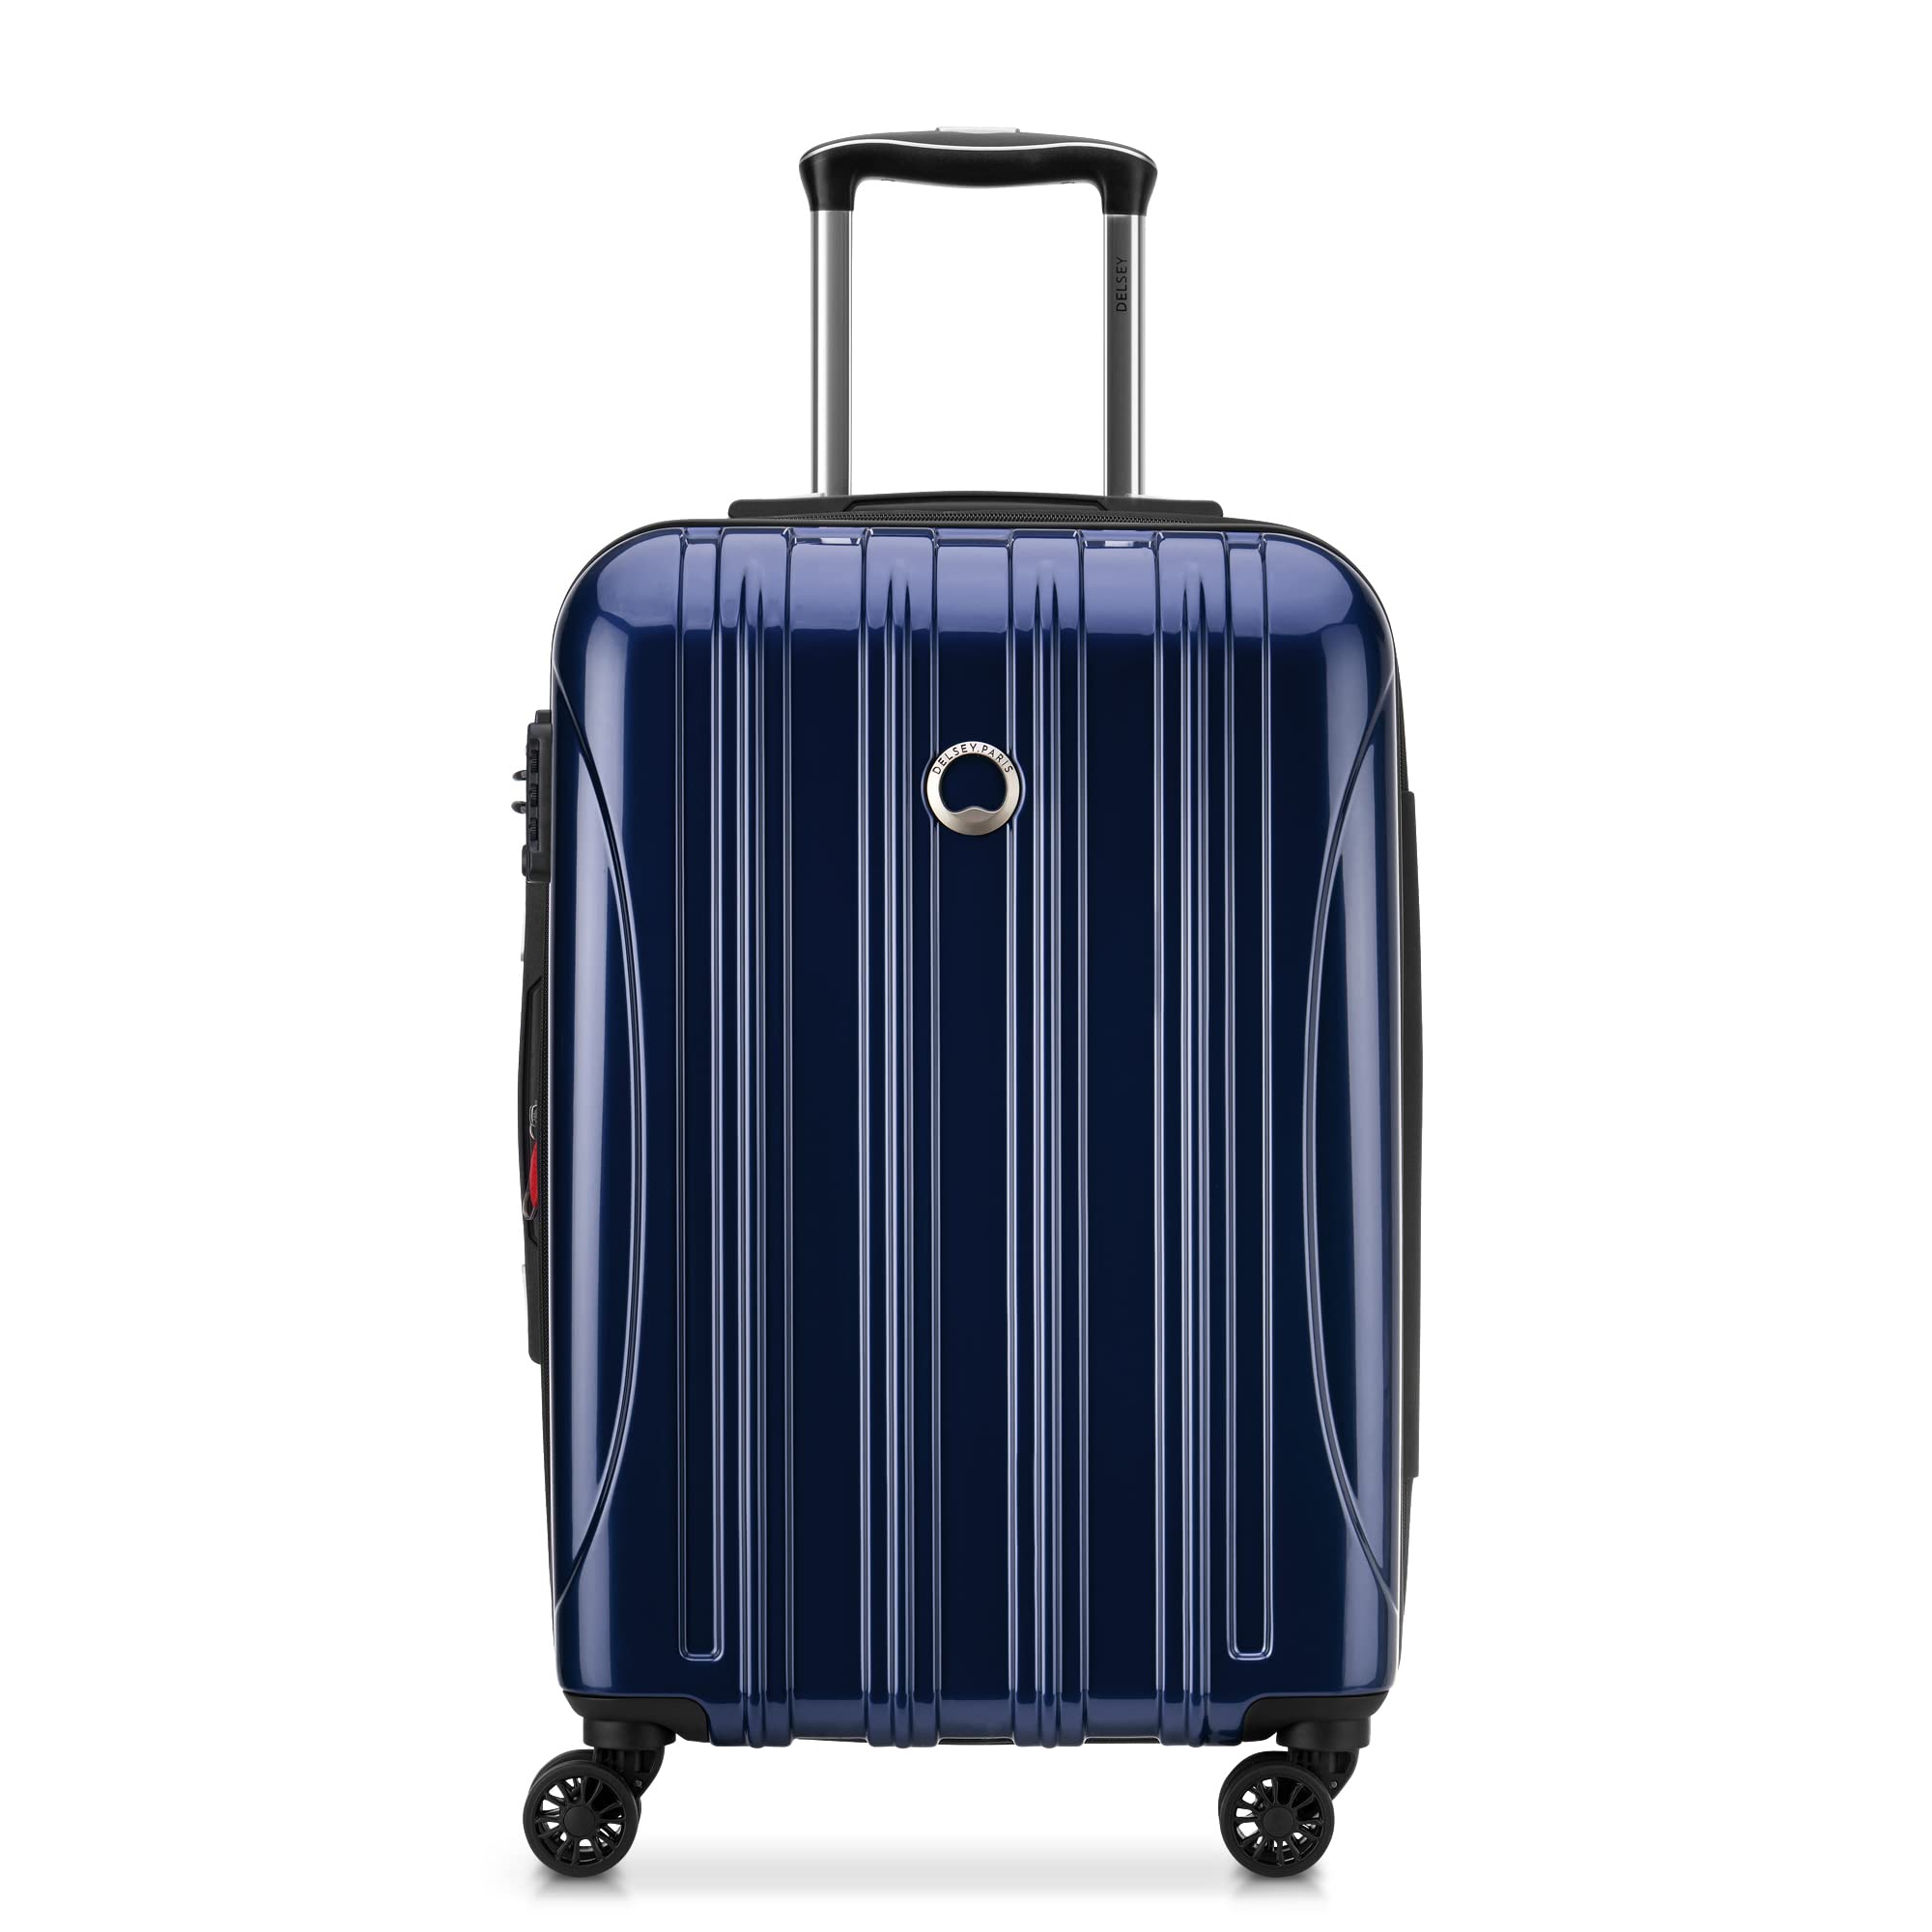 The Best Luggage For International Travel